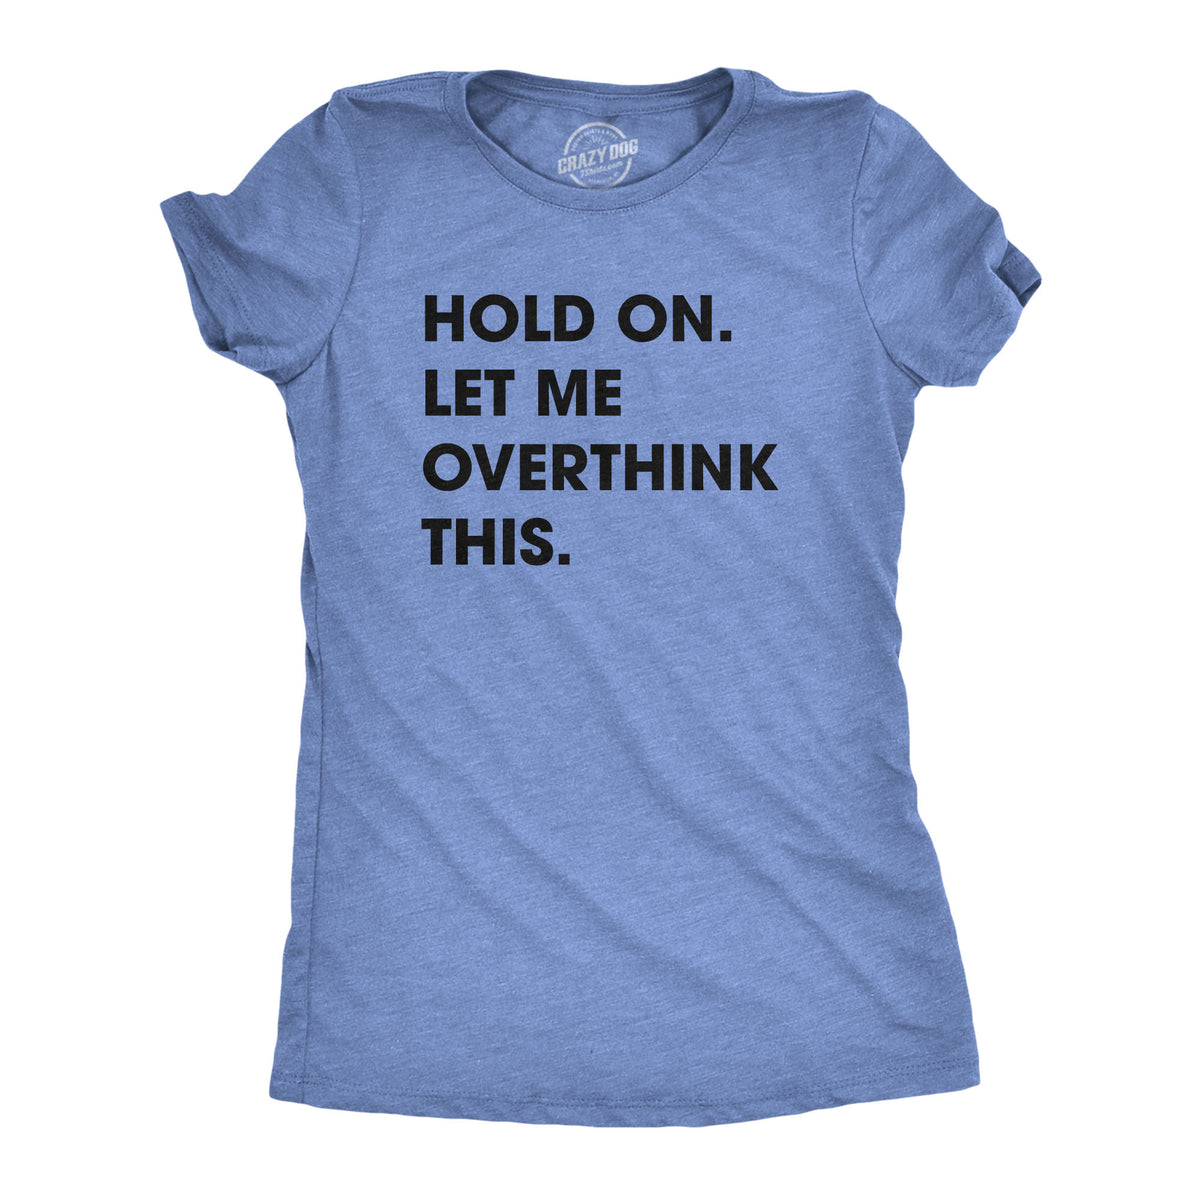 Funny Heather Light Blue Hold On Let Me Overthink This Womens T Shirt Nerdy Introvert Tee